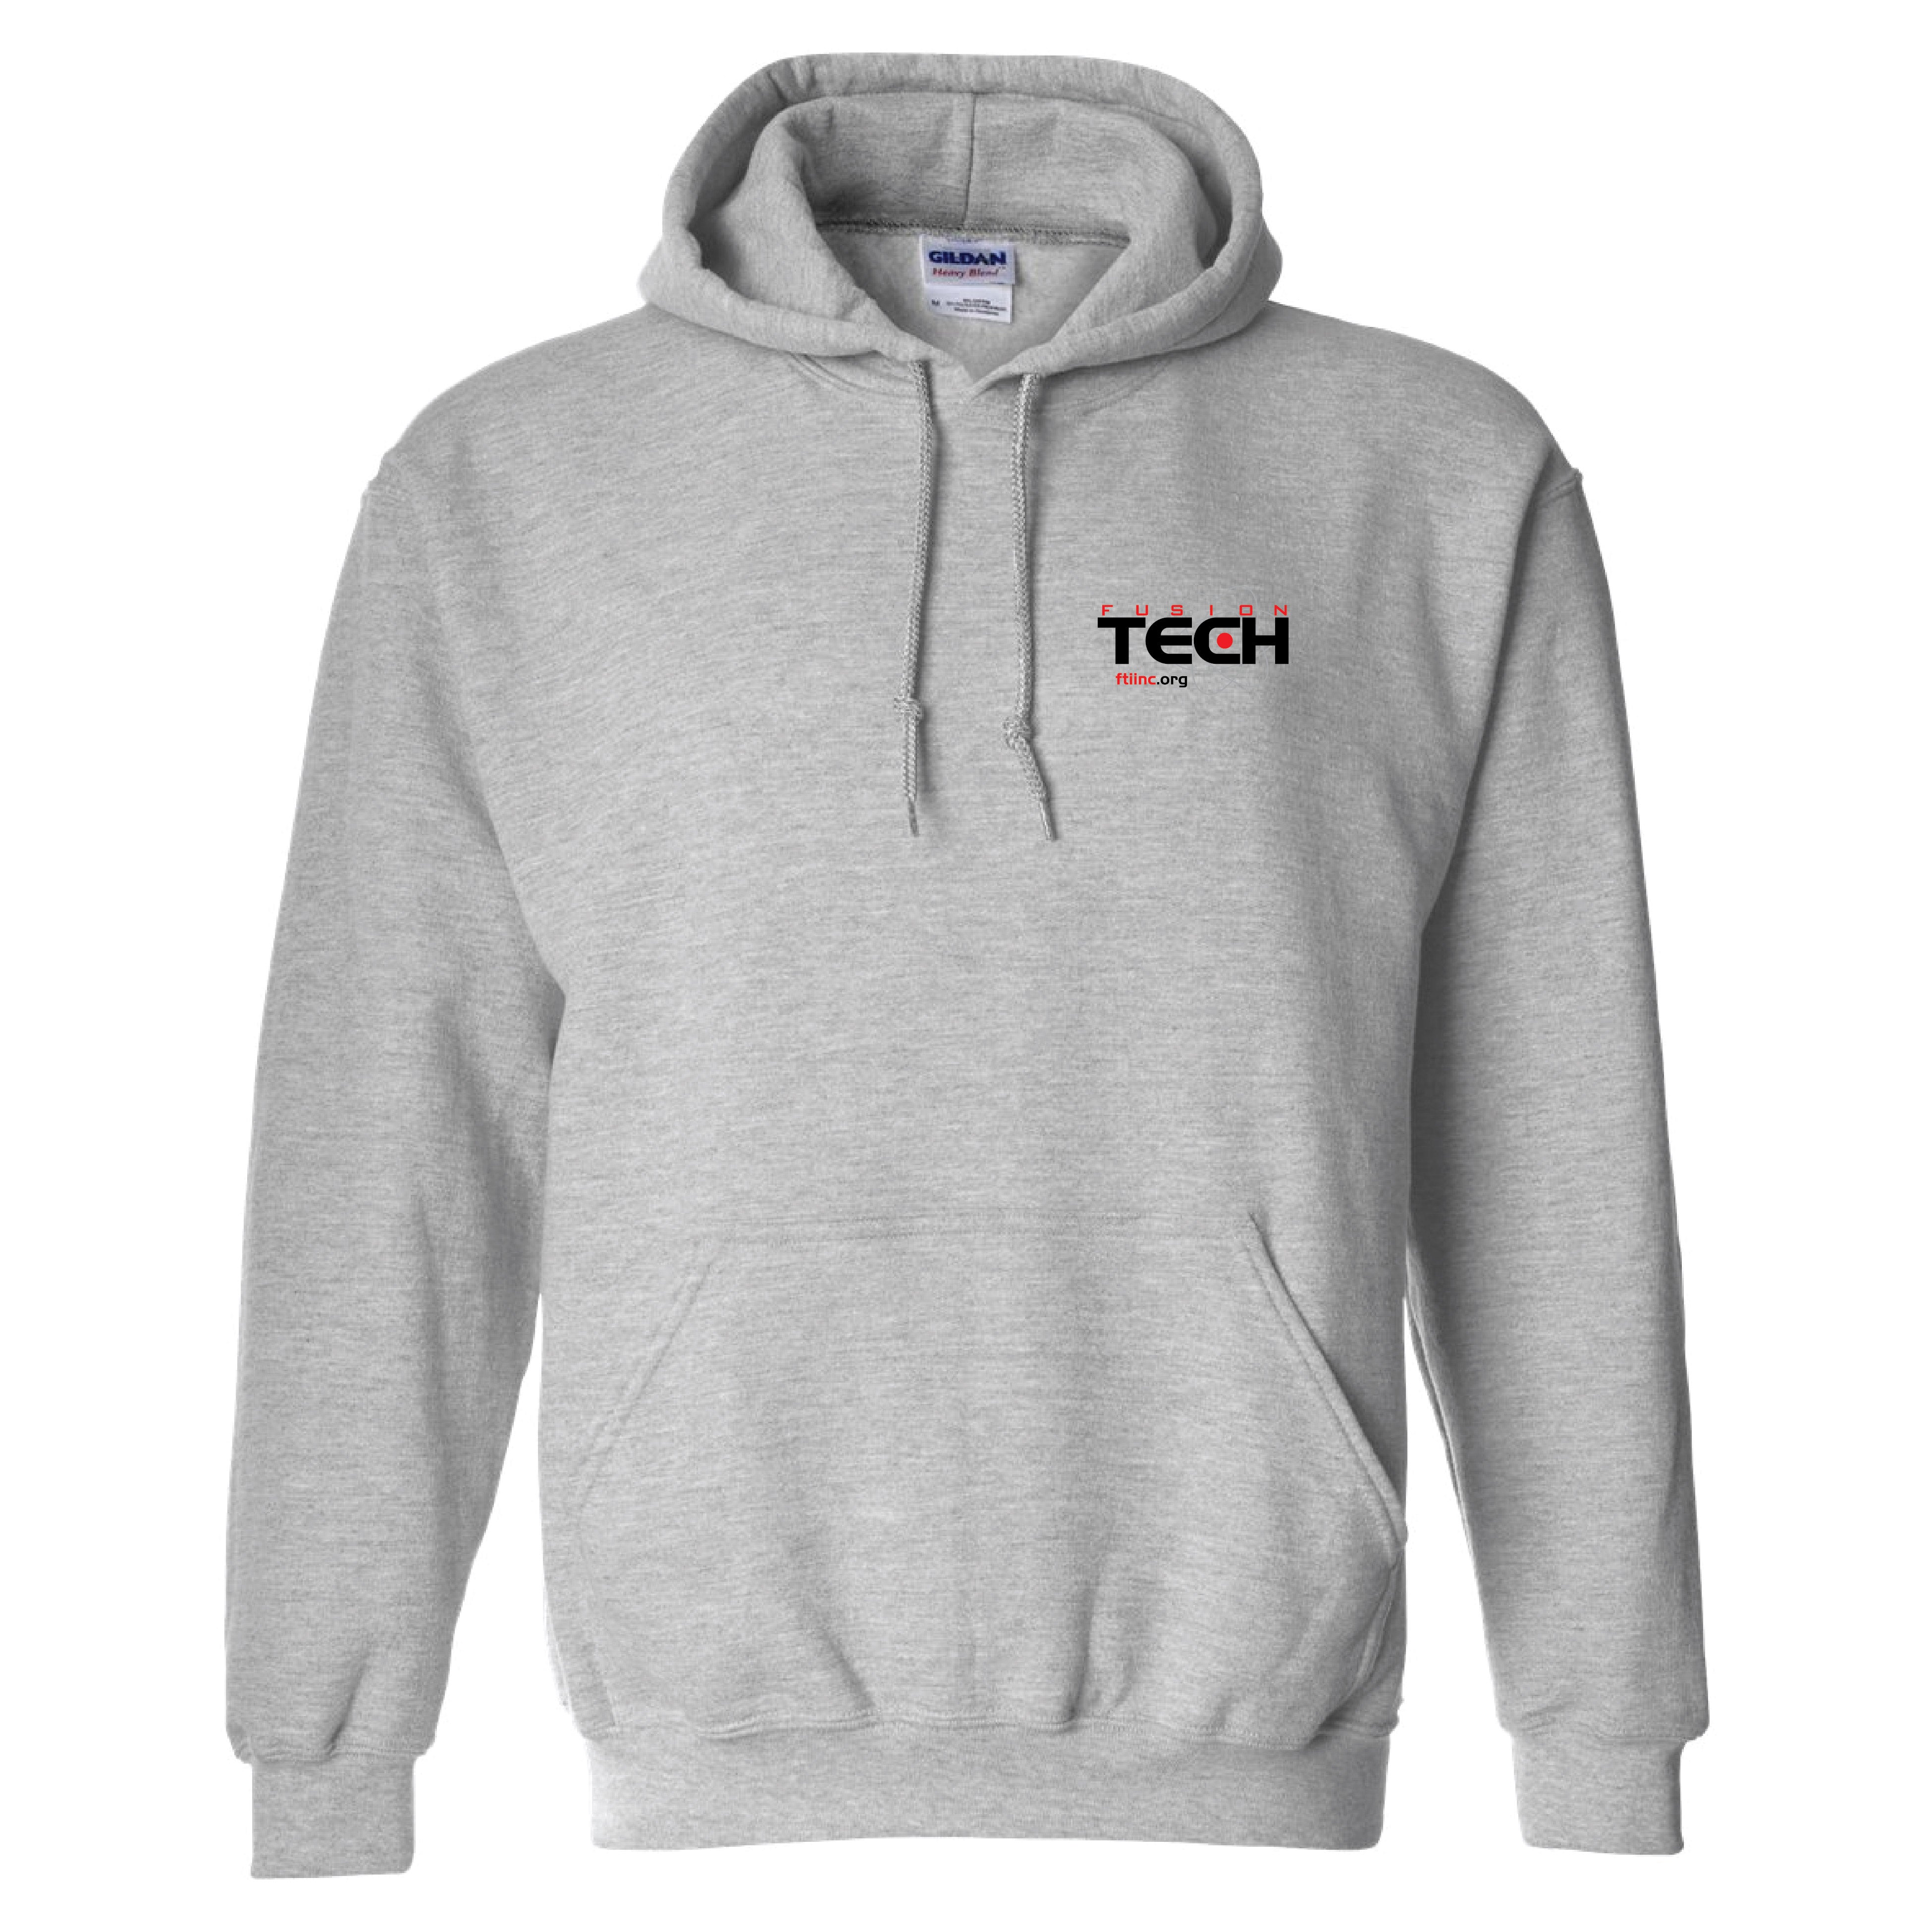 Fusion Tech Embroidered Hooded Sweatshirt